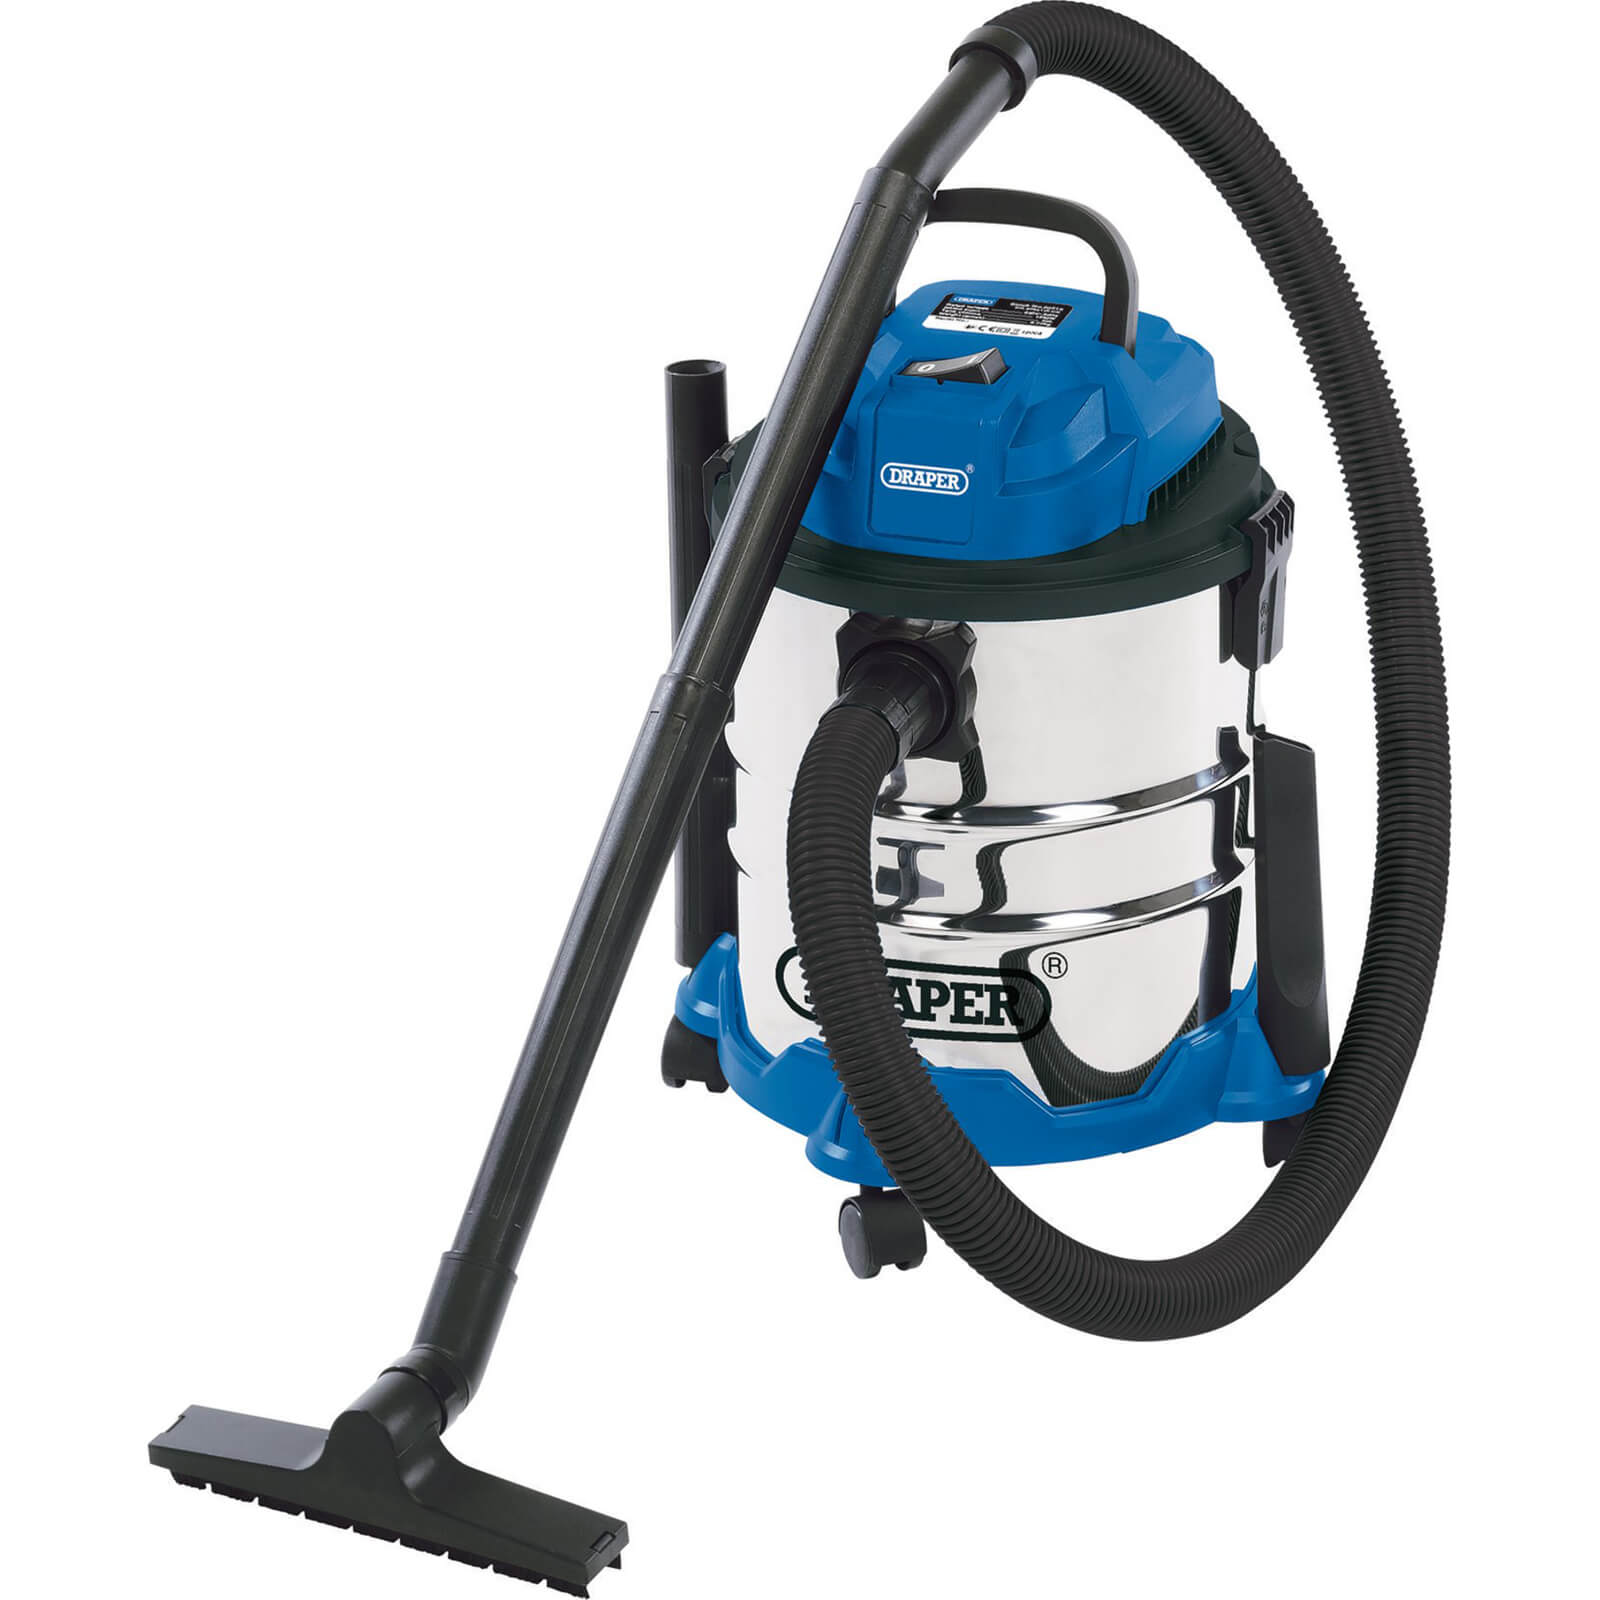 Image of Draper Wet and Dry Vacuum Cleaner With Stainless Steel Tank 20L 240v